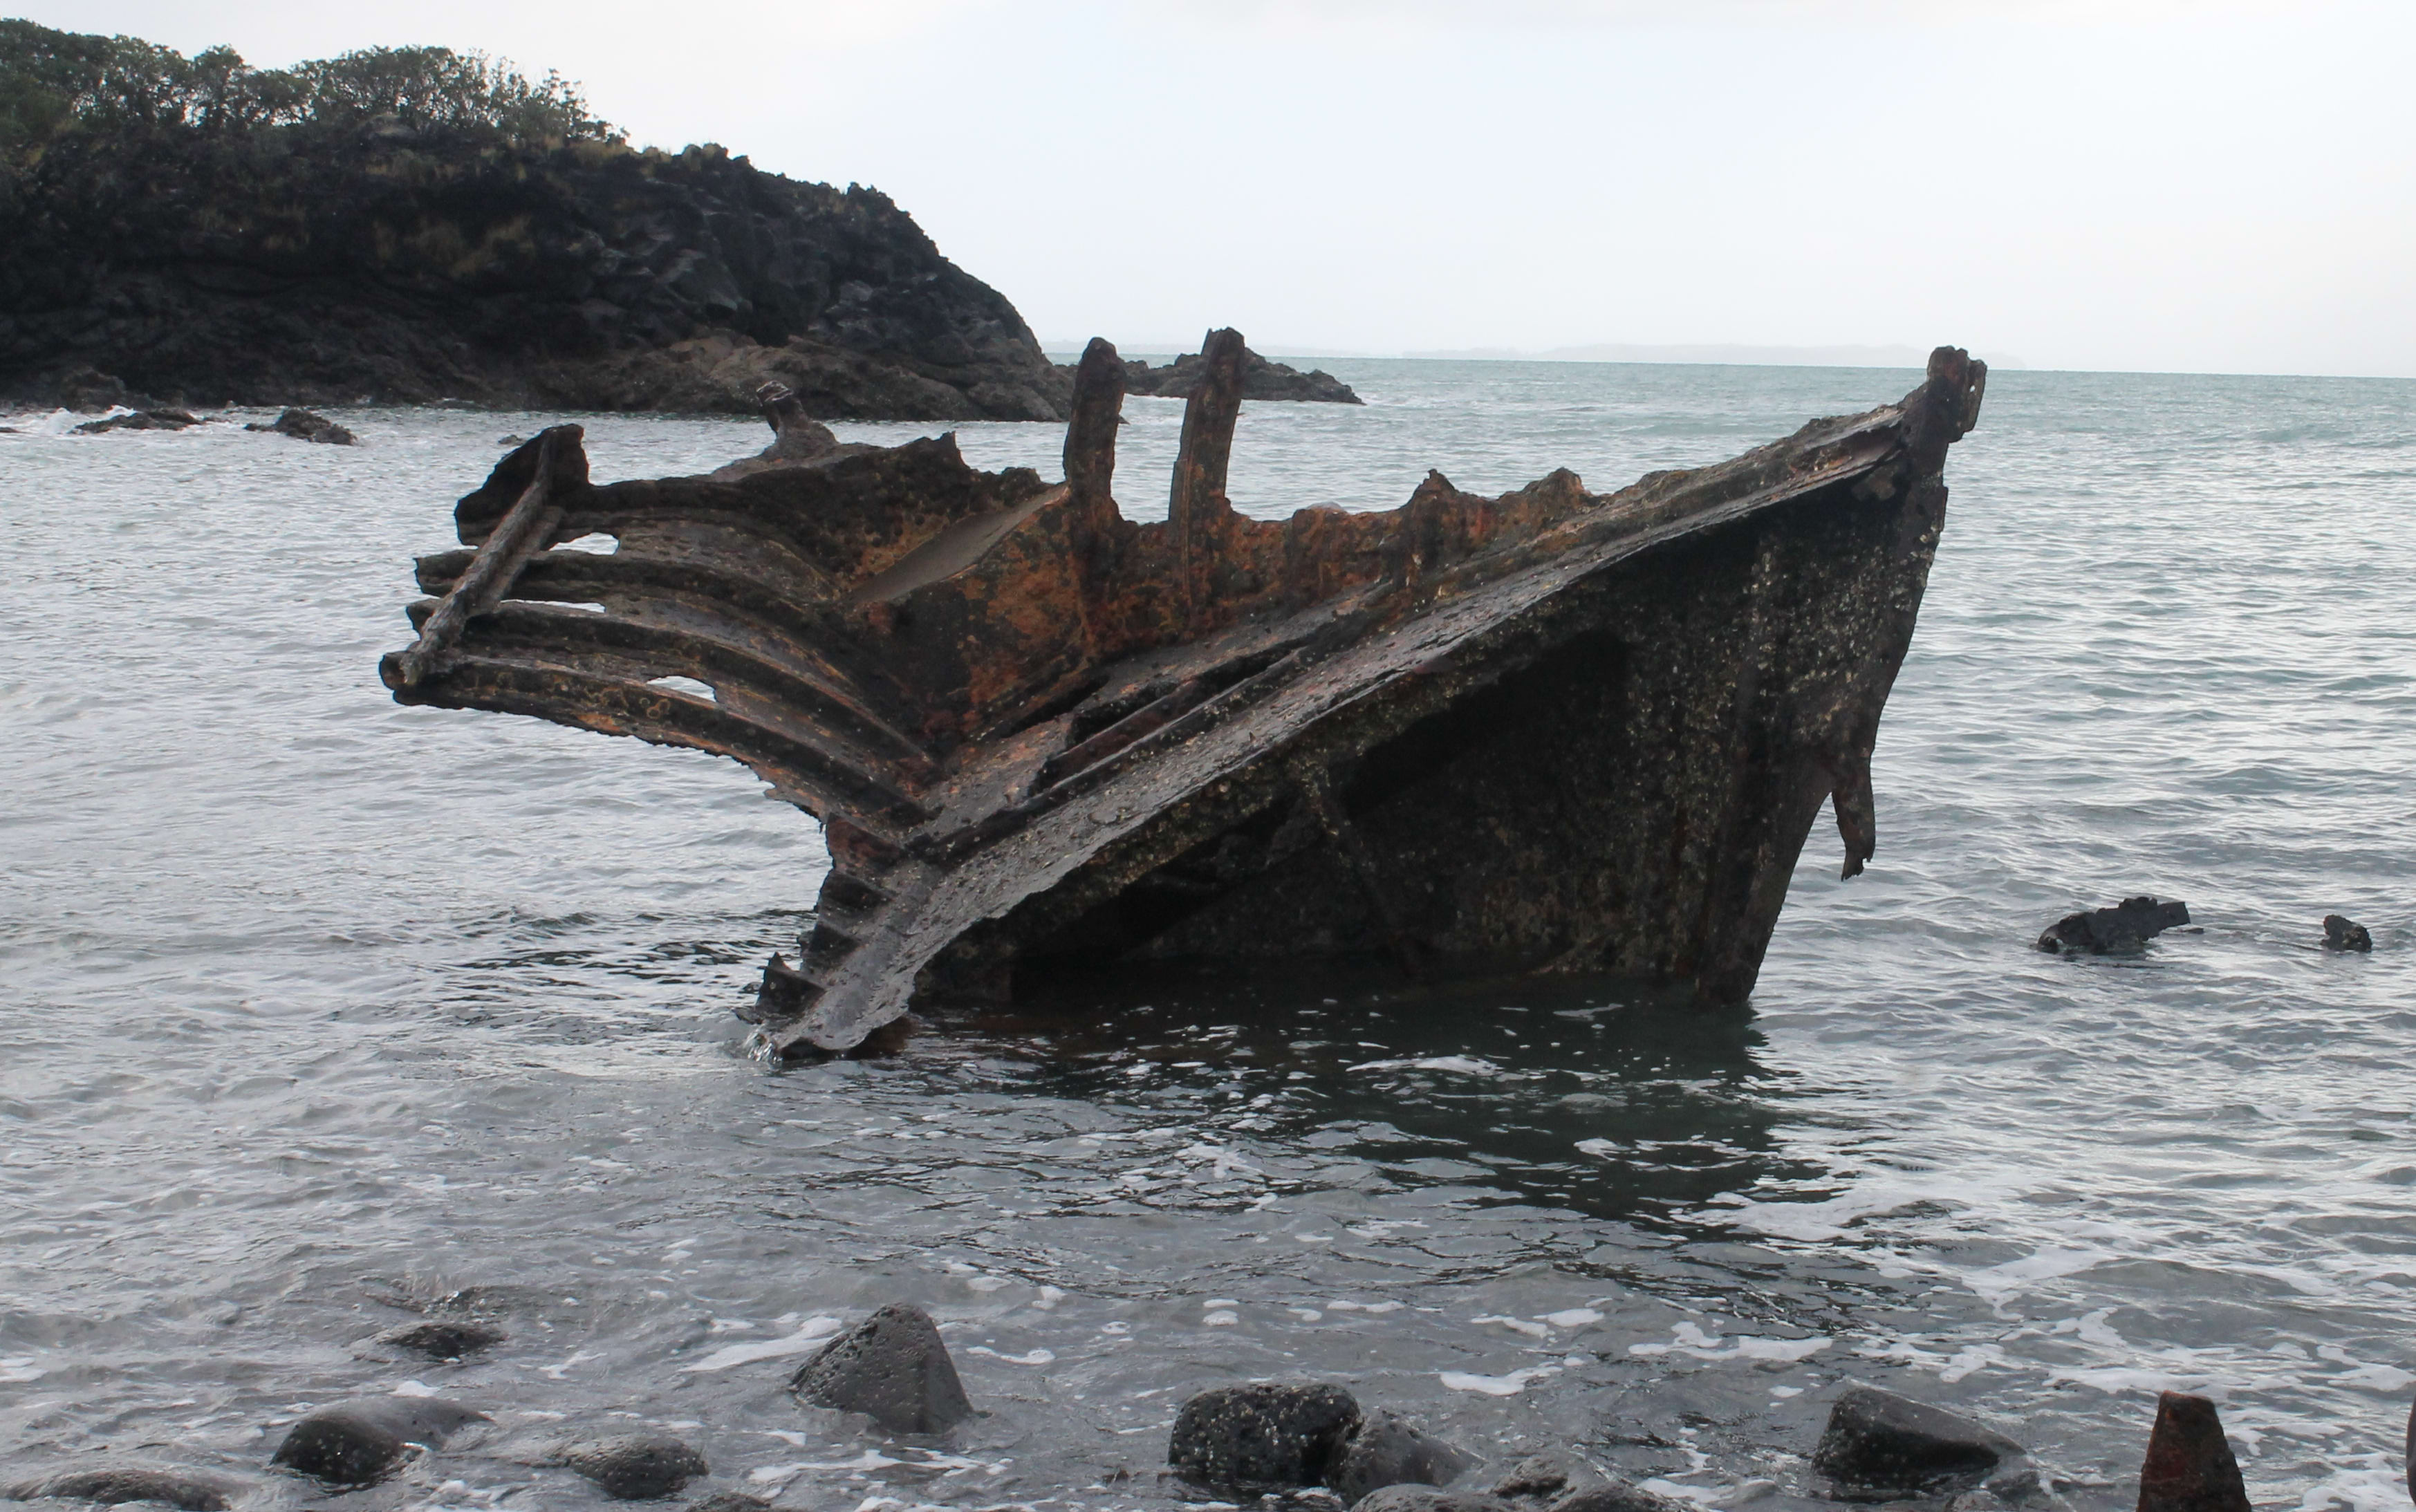 This is an image Kurt Bennett and the remains of the steamship Ngapuhi at 'Wreck' Bay.